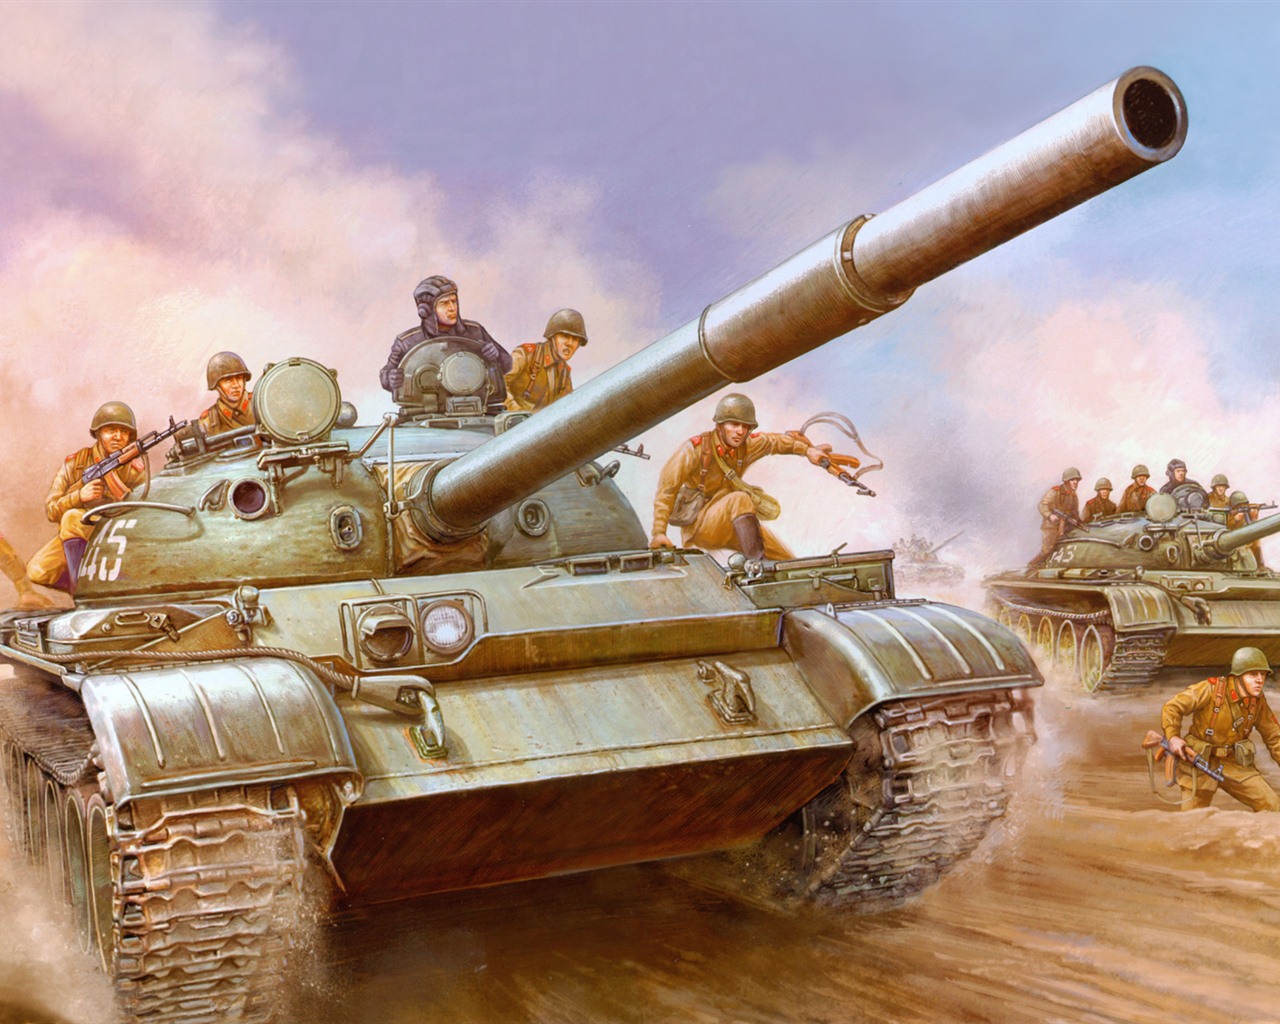 Military tanks, armored HD painting wallpapers #16 - 1280x1024